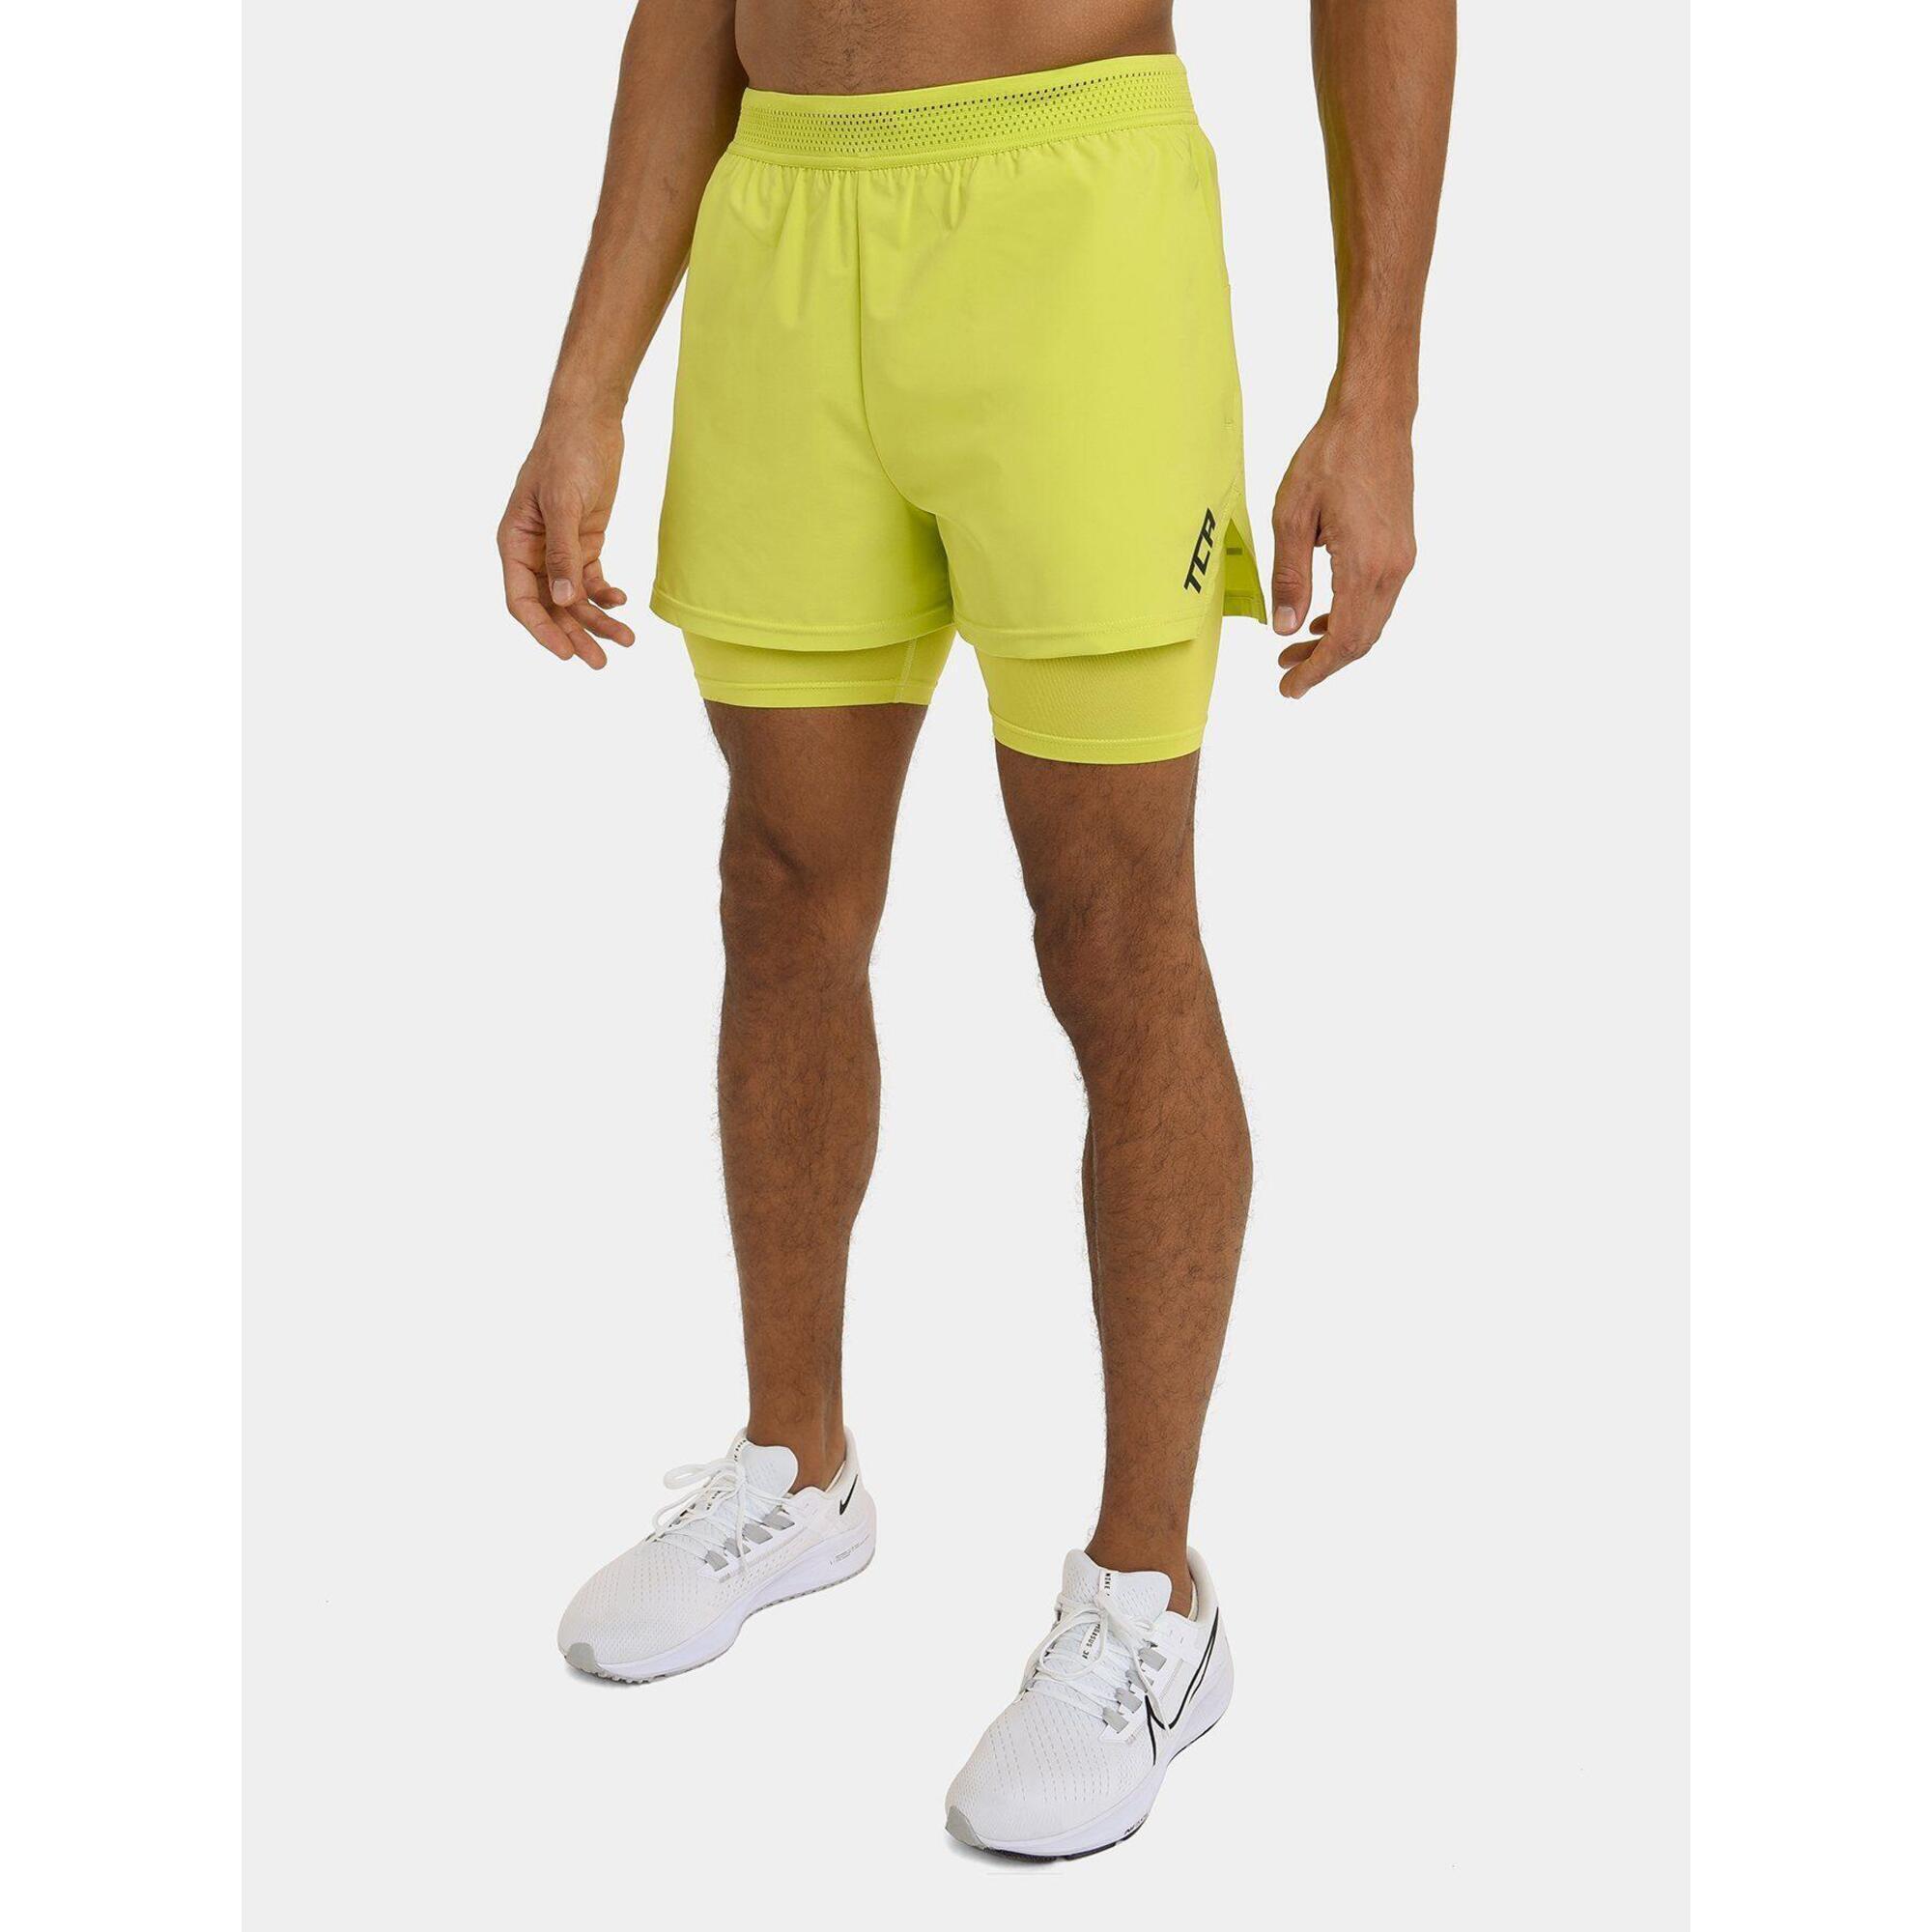 TCA Men's Lightweight 2-in-1 Running Shorts - Lime Punch